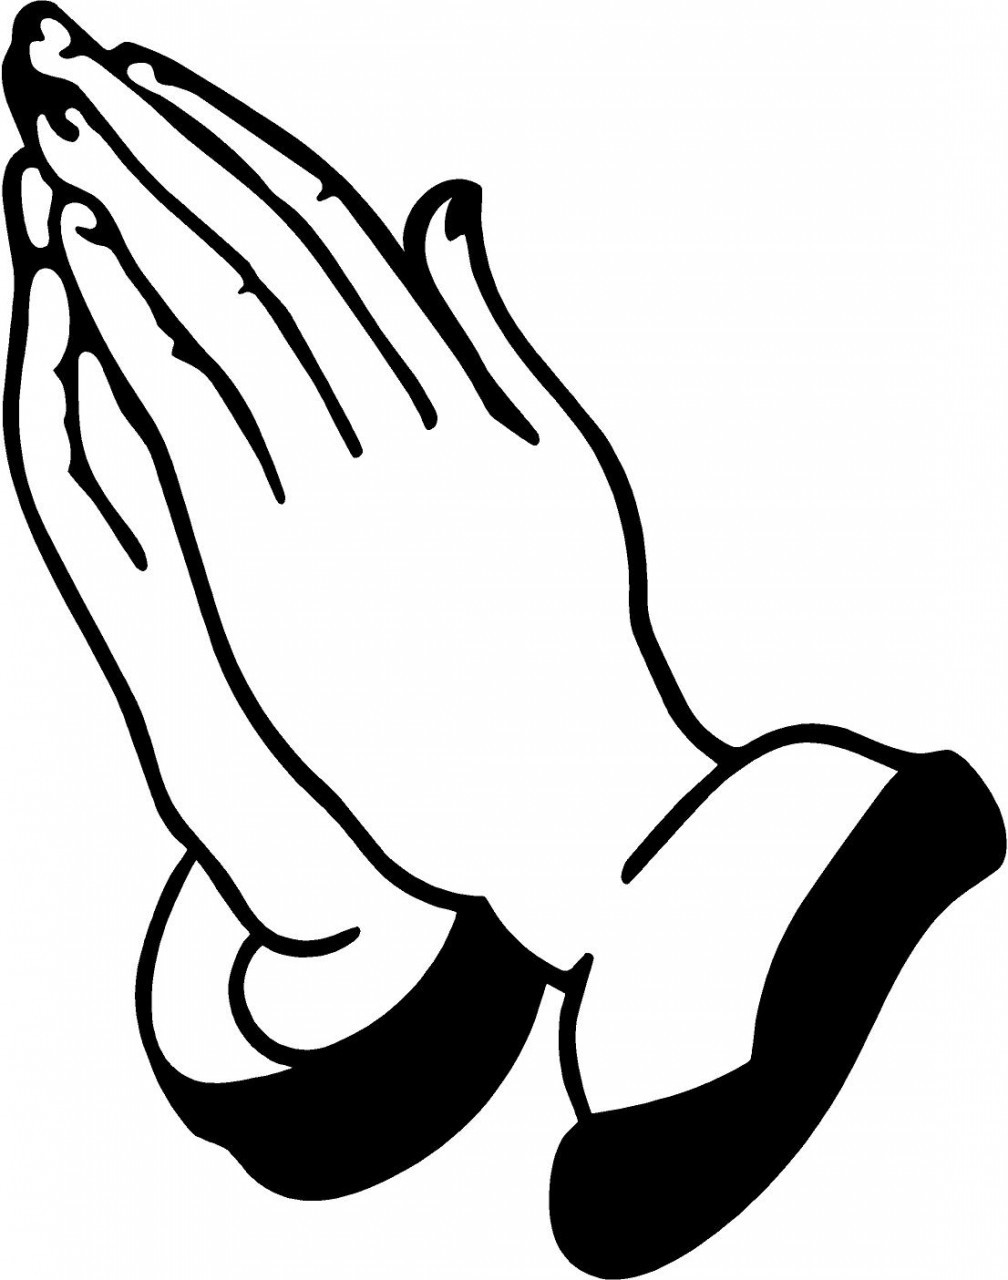 Prayer Hands Clipart | Clipart library - Free Clipart Images